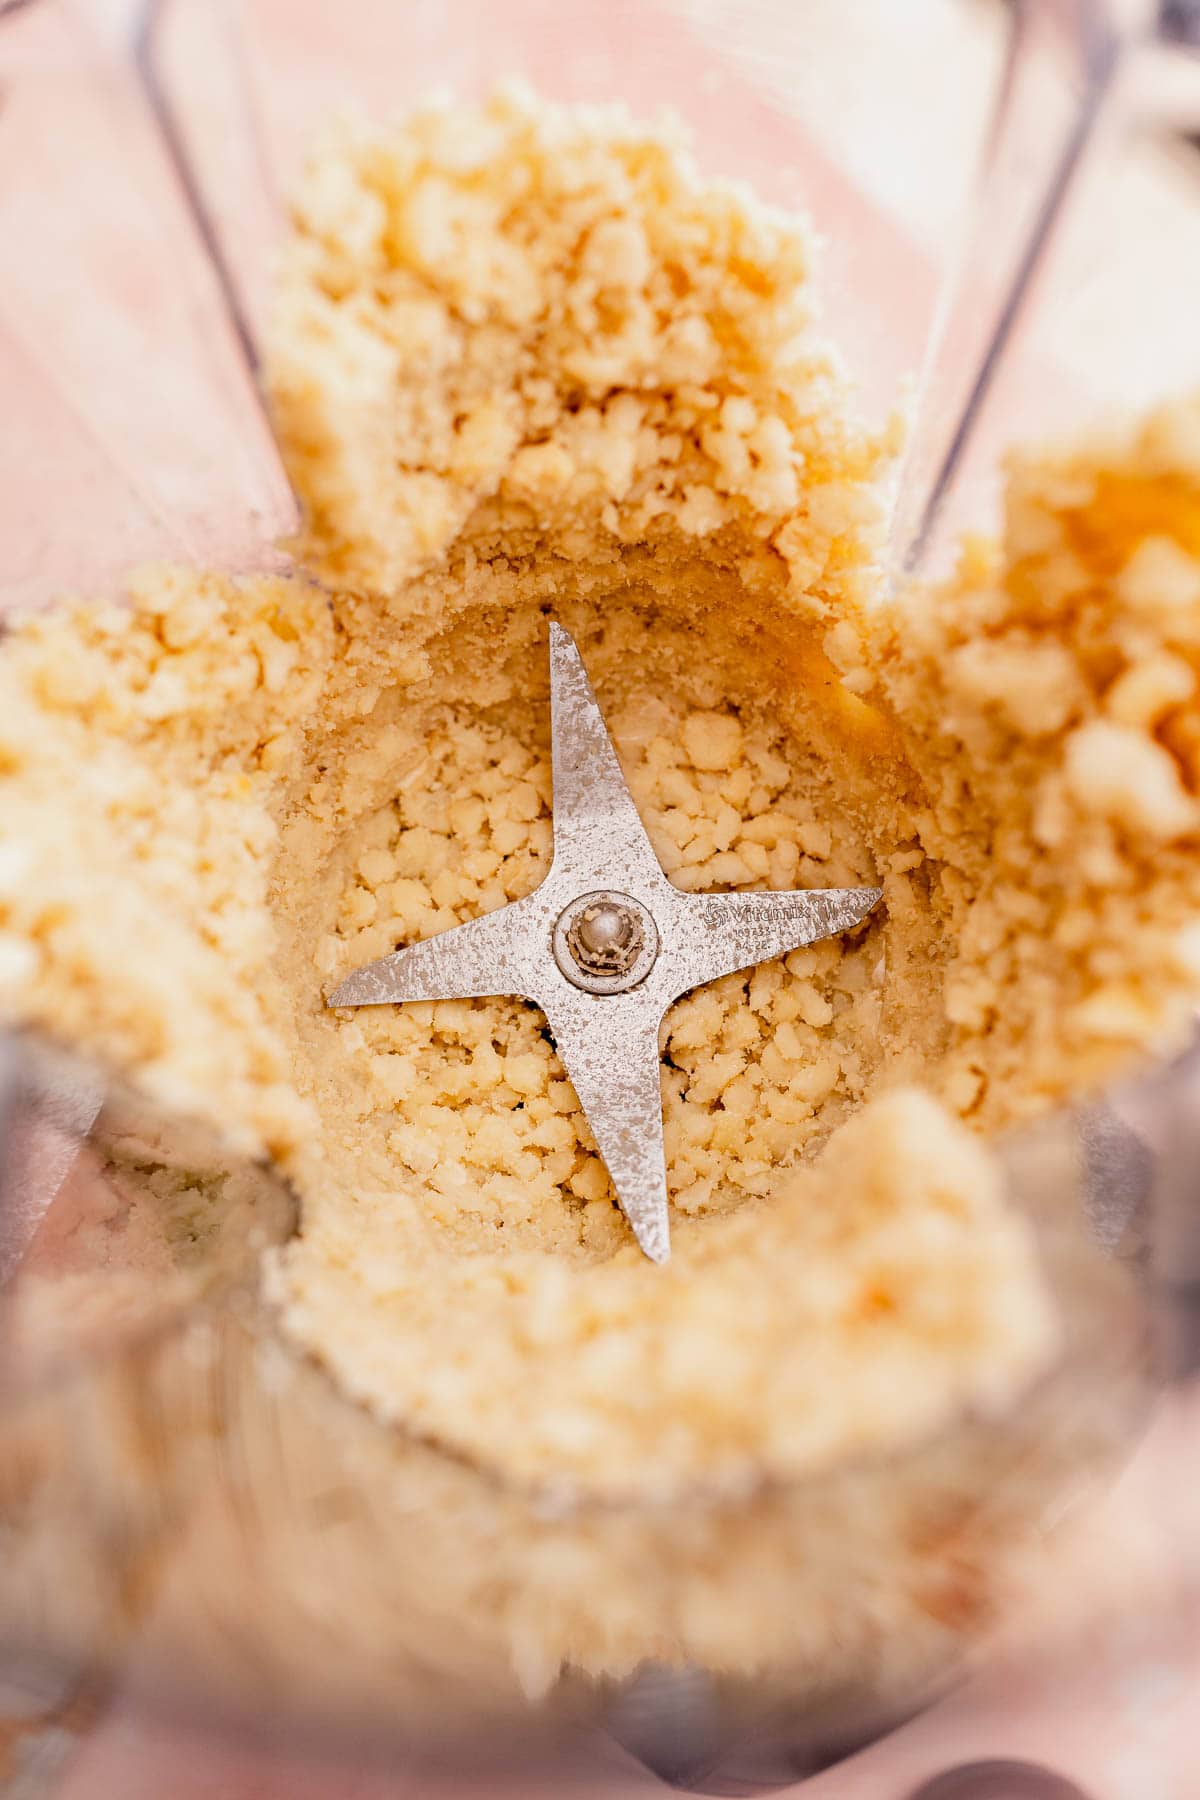 Crushed macadamia nut butter and cookie crumbs in a blender with a visible metal blade.